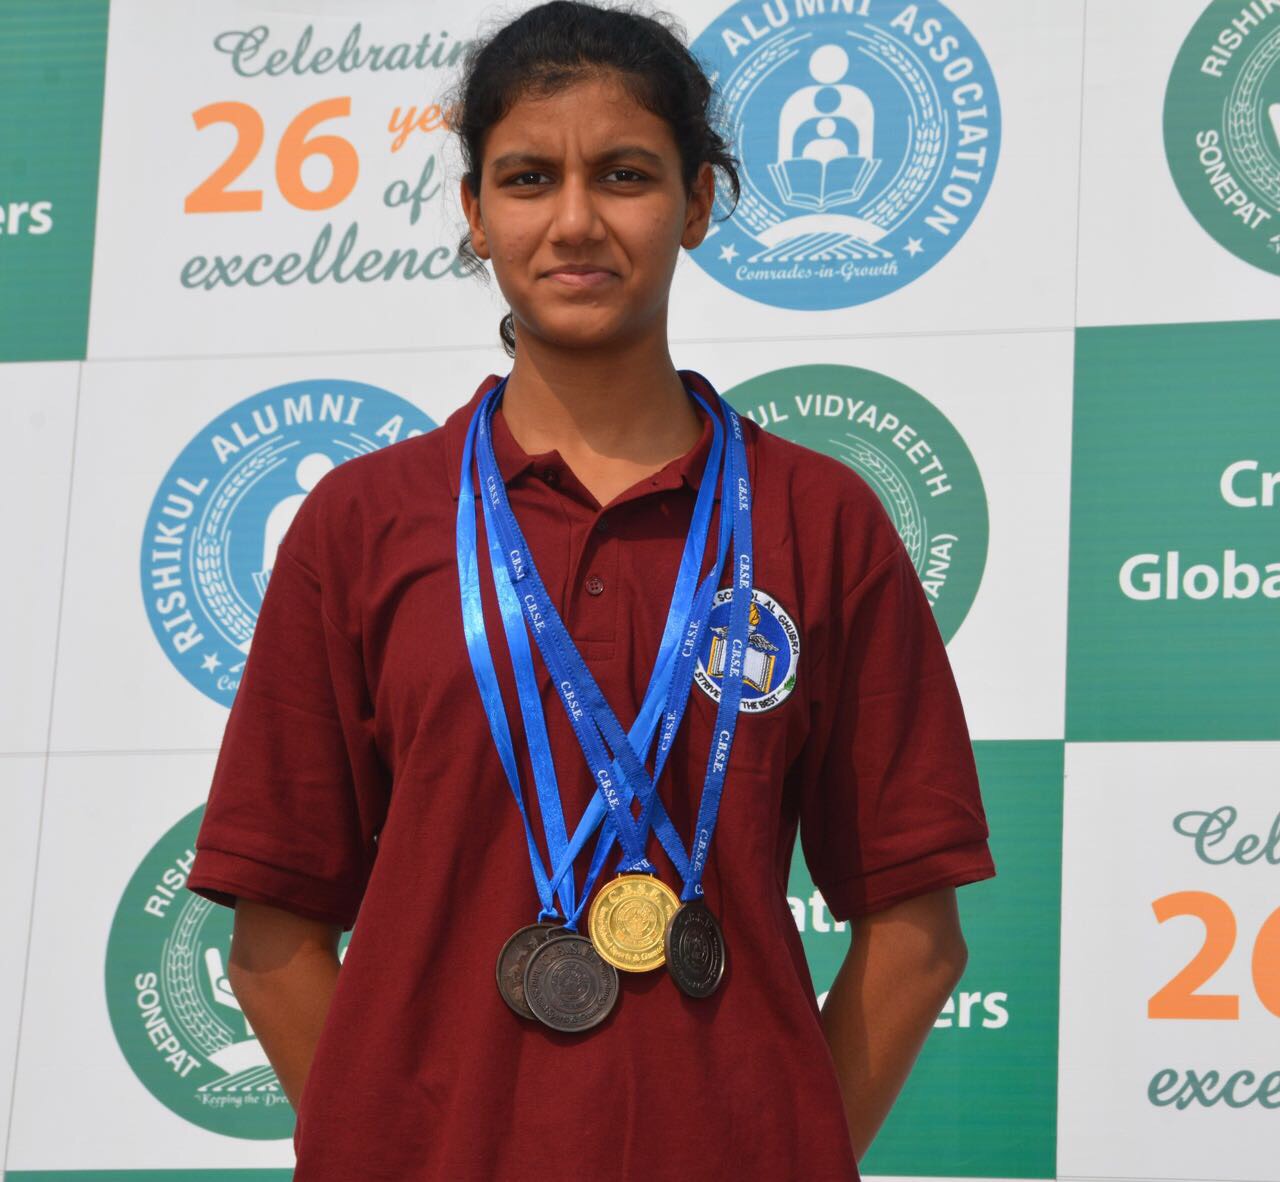 Indian School Al Ghubra student creates new record at CBSE national swimming championship